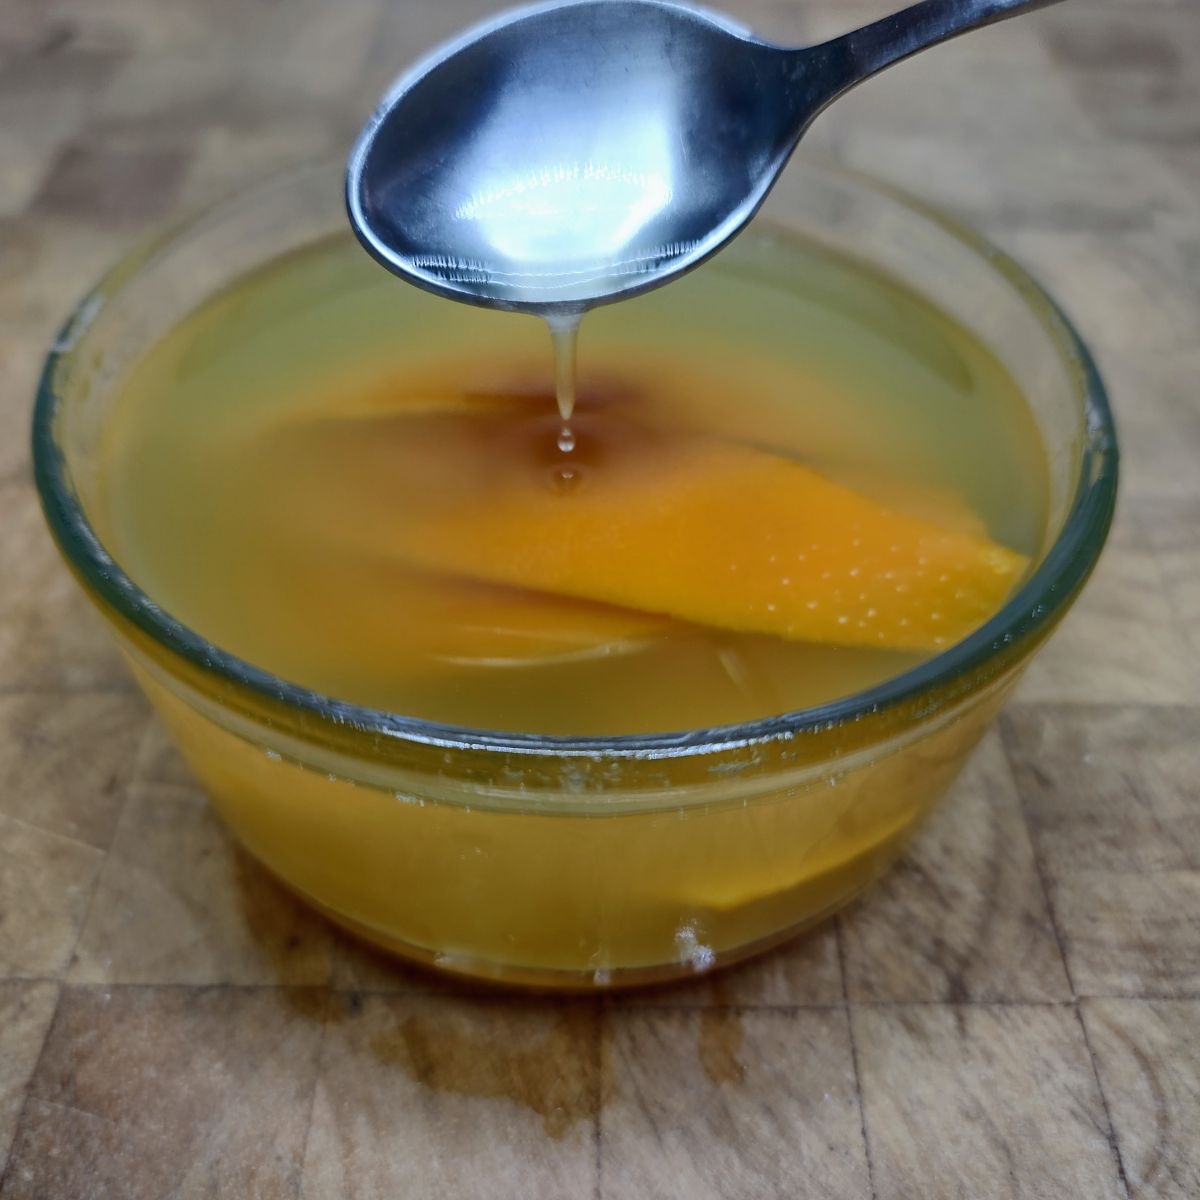 Orange simple syrup being scooped by a spoon.